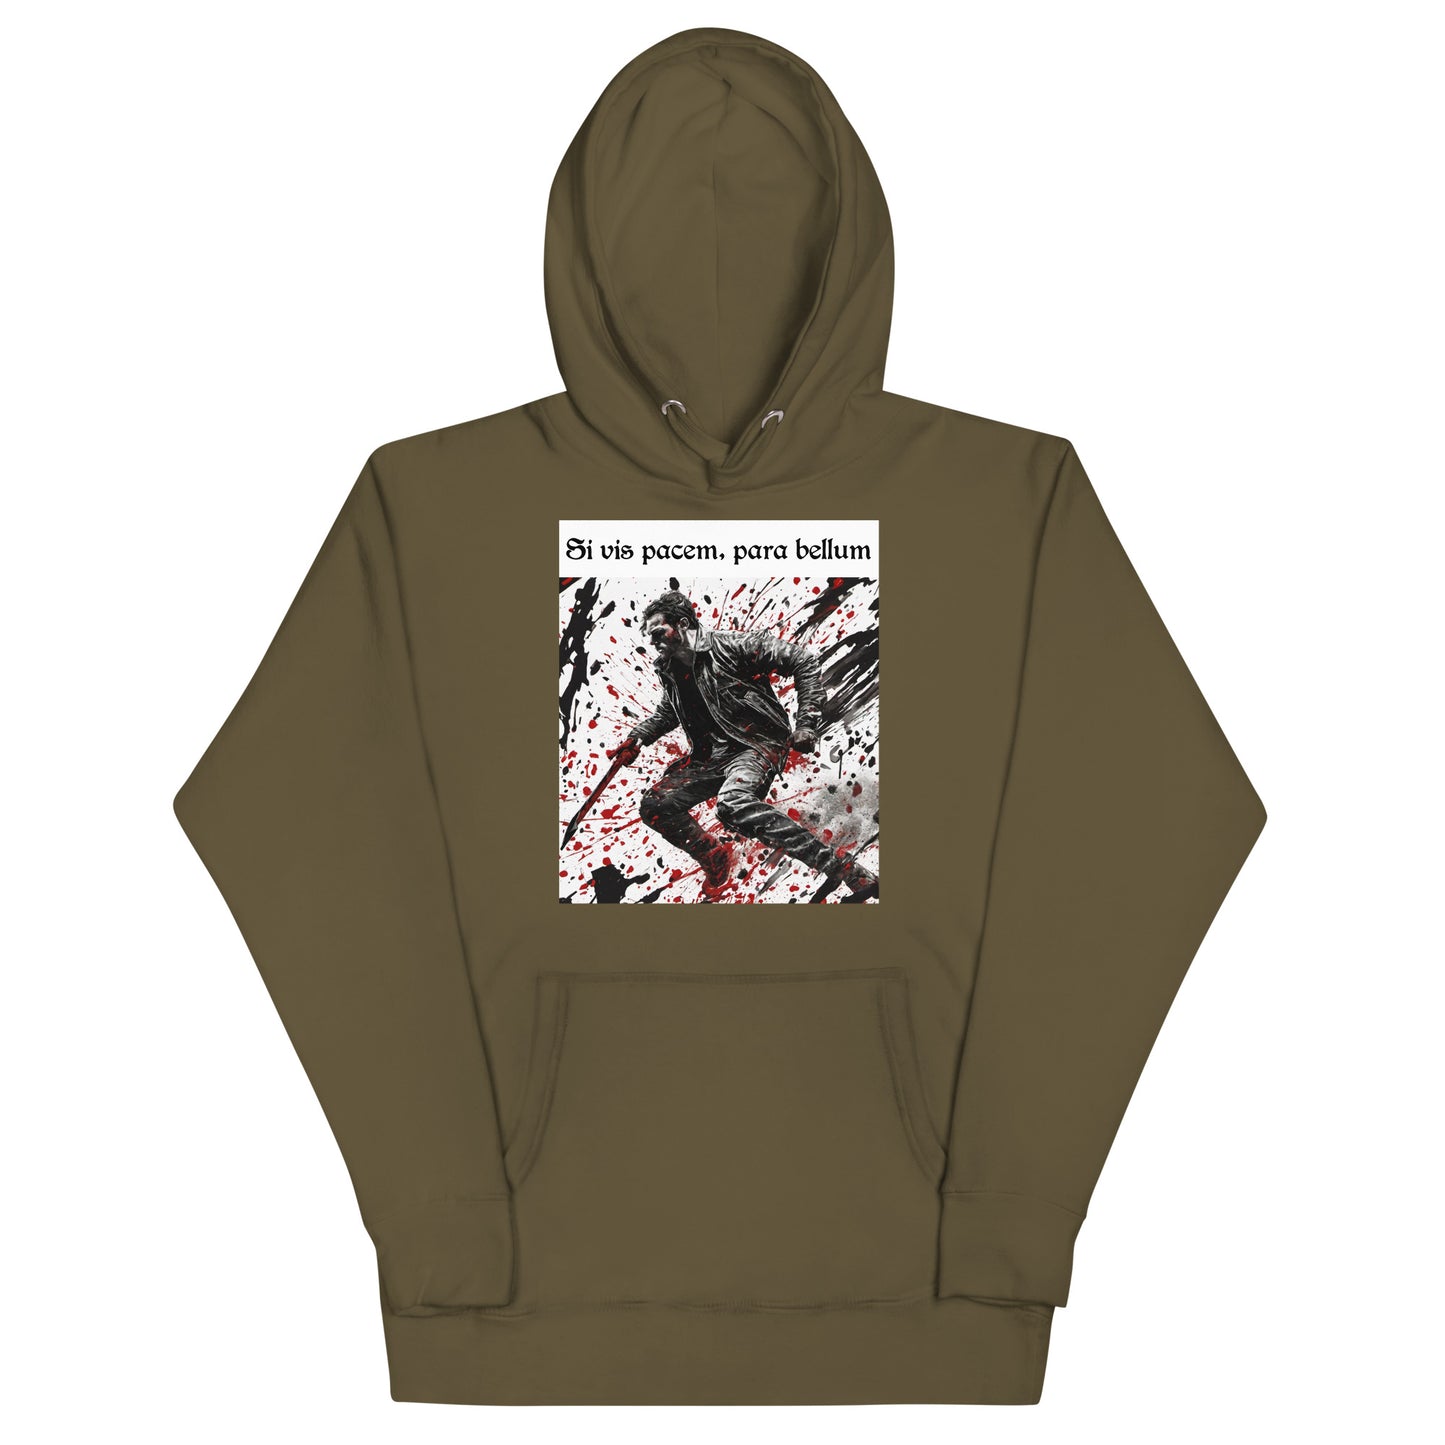 If You Want Peace, Prepare for War Men's Hoodie Military Green